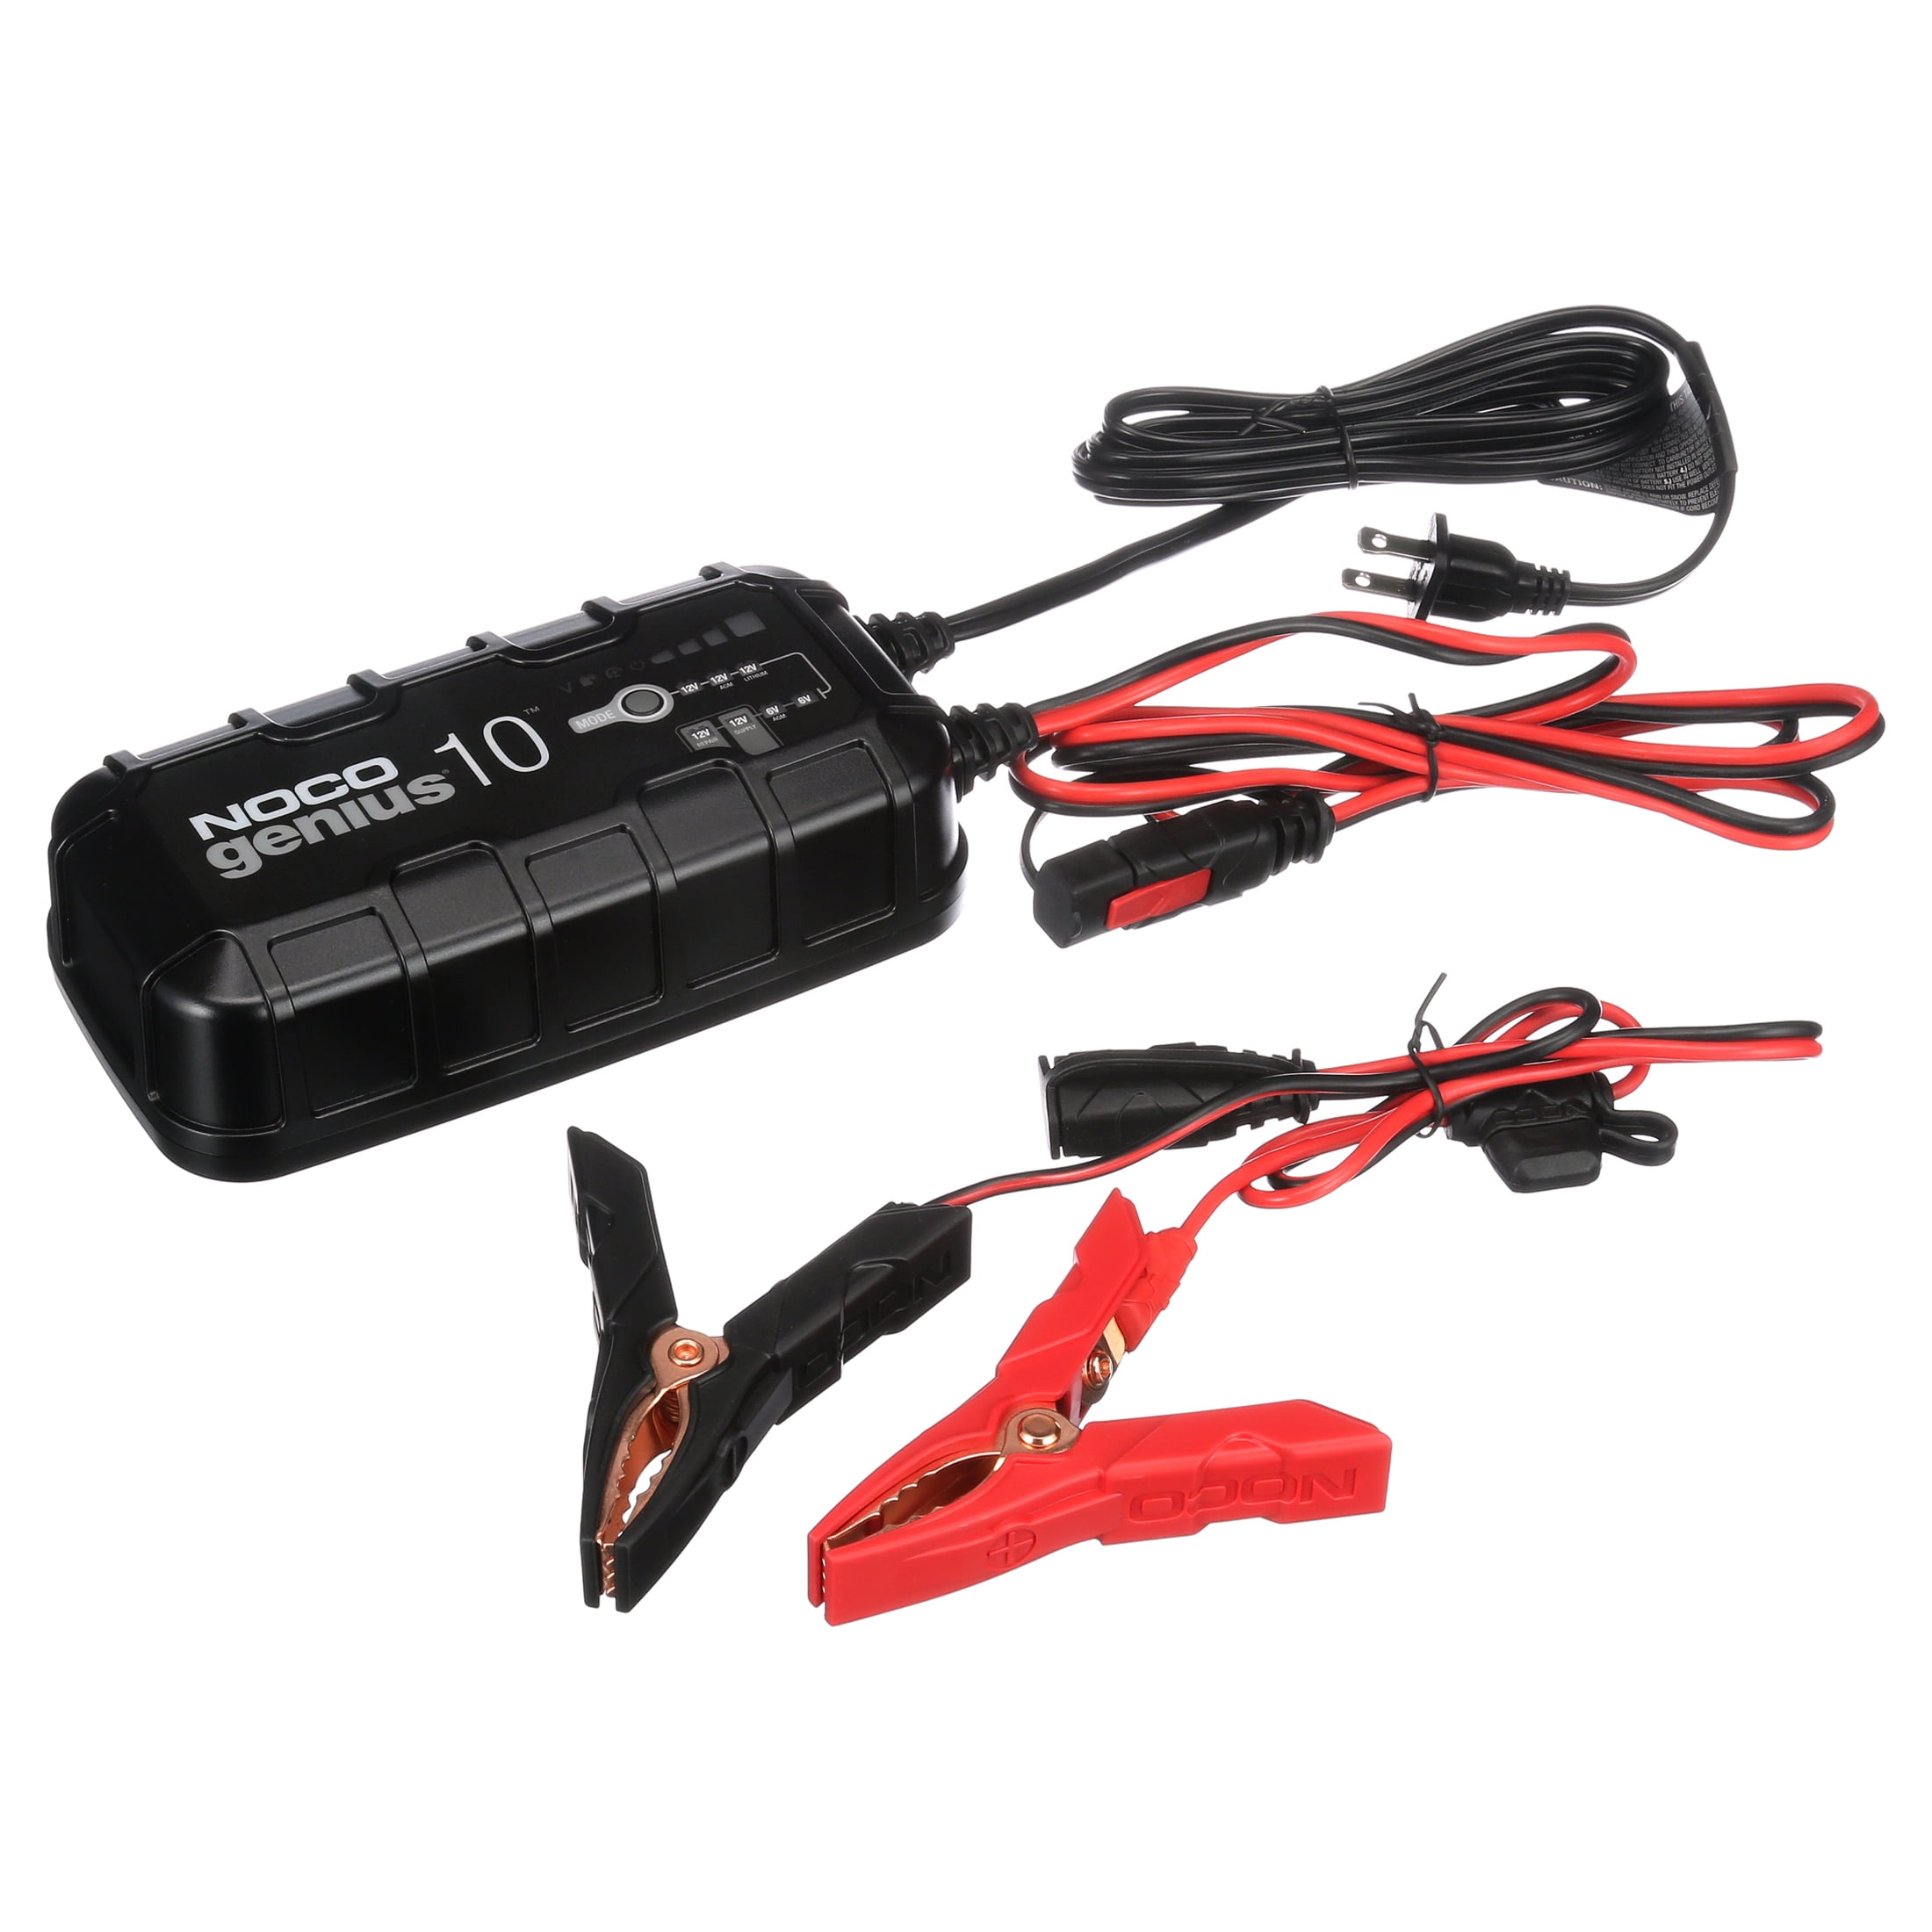 NOCO GENIUS10 6V/12V 10A Smart Battery Charger and